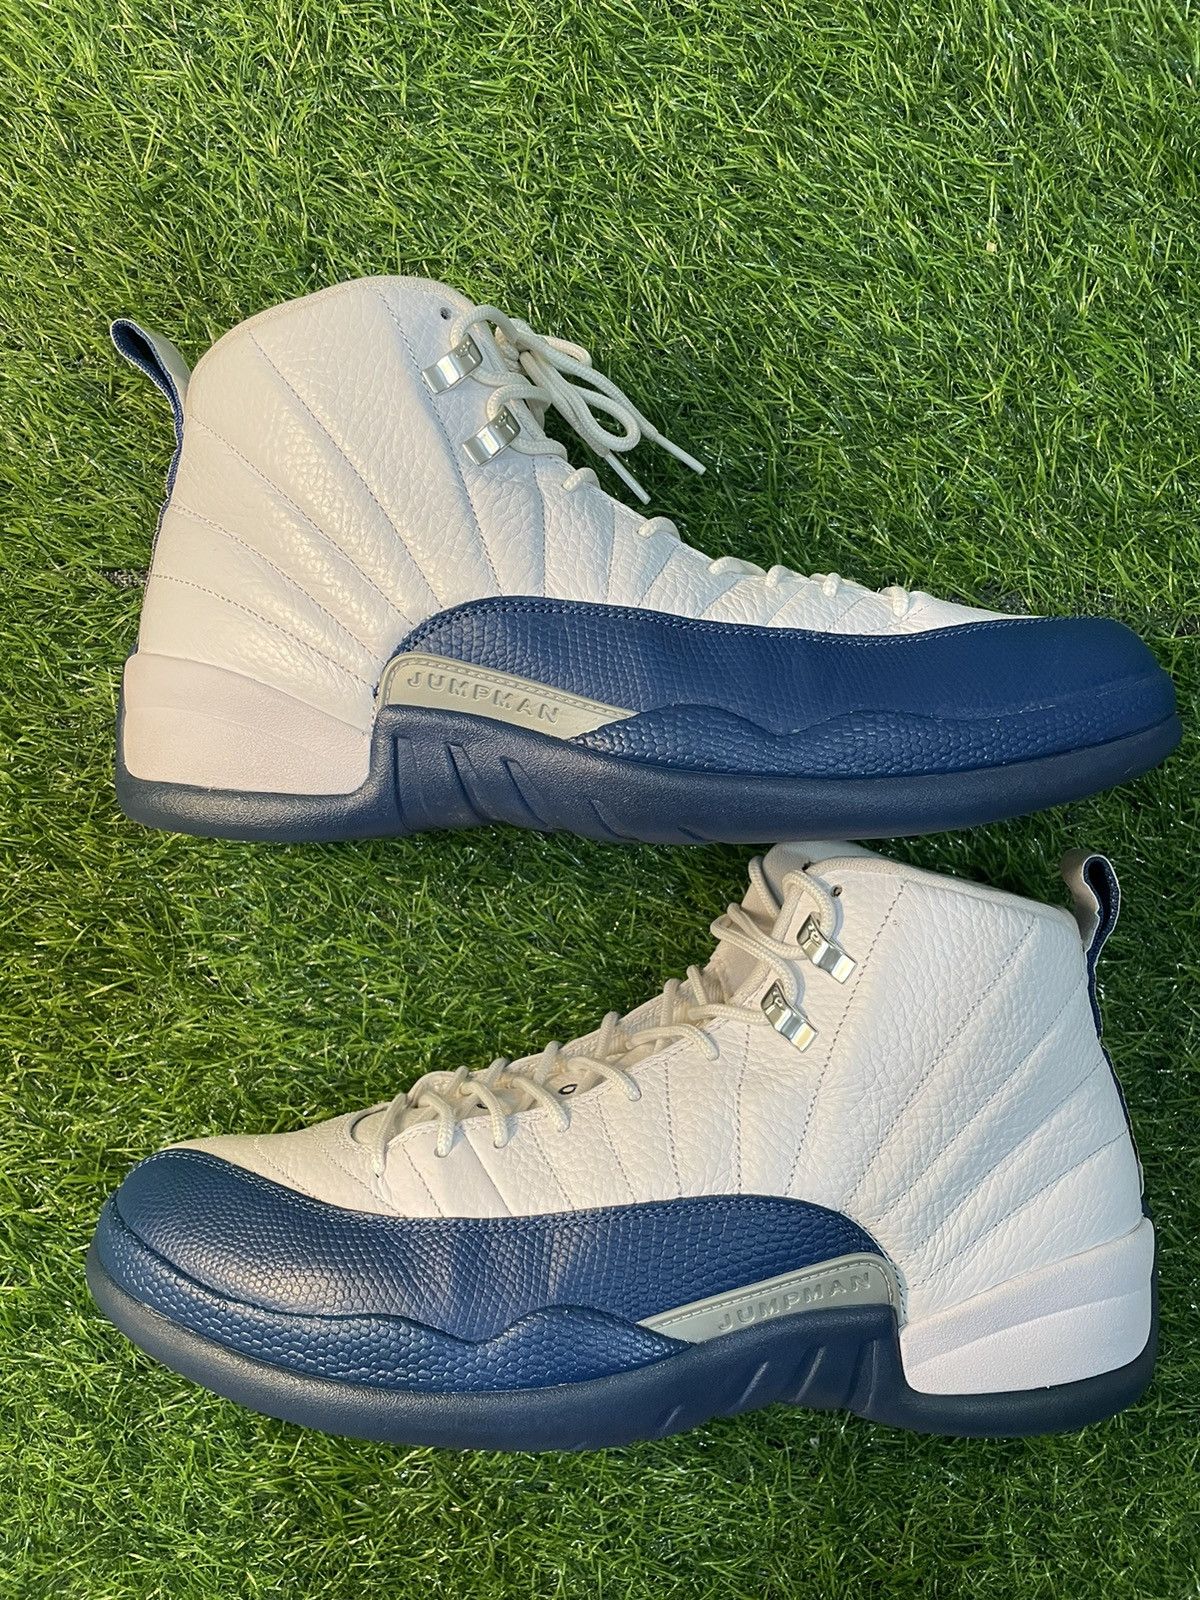 Pre-owned Jordan Brand 12 French Blue Shoes